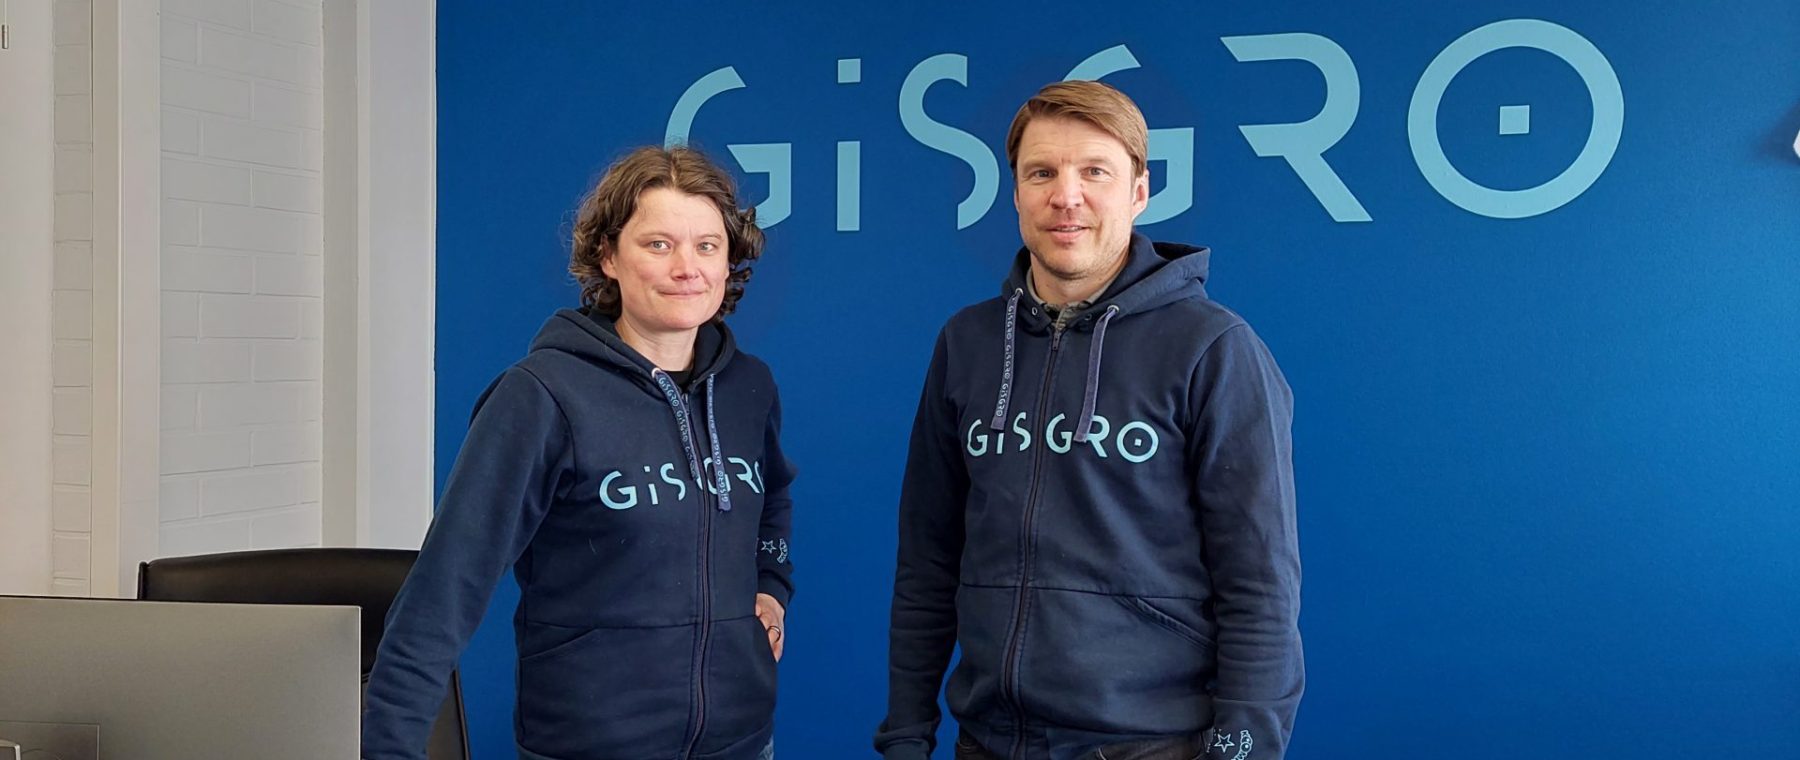 GISGRO receives new knowhow to accelerate the growth of business